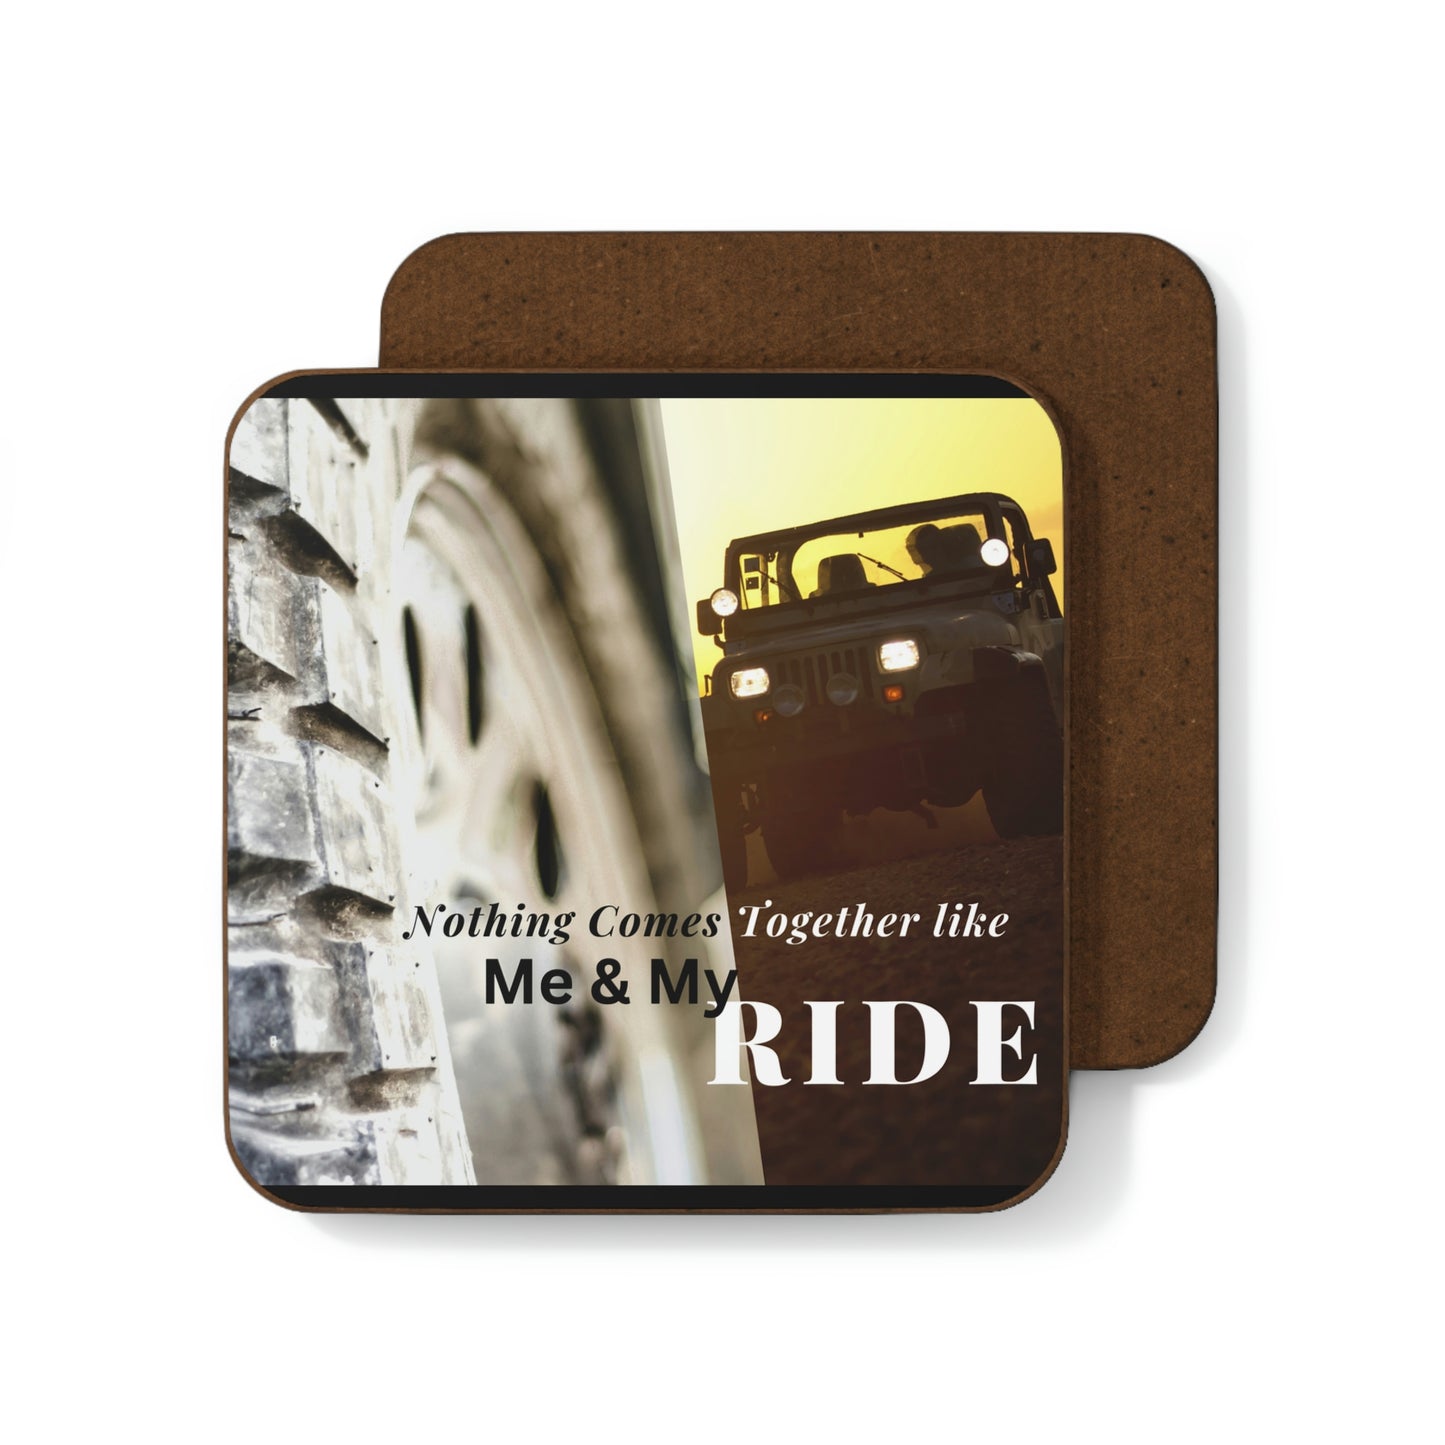 Me & My Ride Hardboard Back Coaster | BKLA | shoes & accessories | backpack, hat, phone cover, tote bags, clutch bags